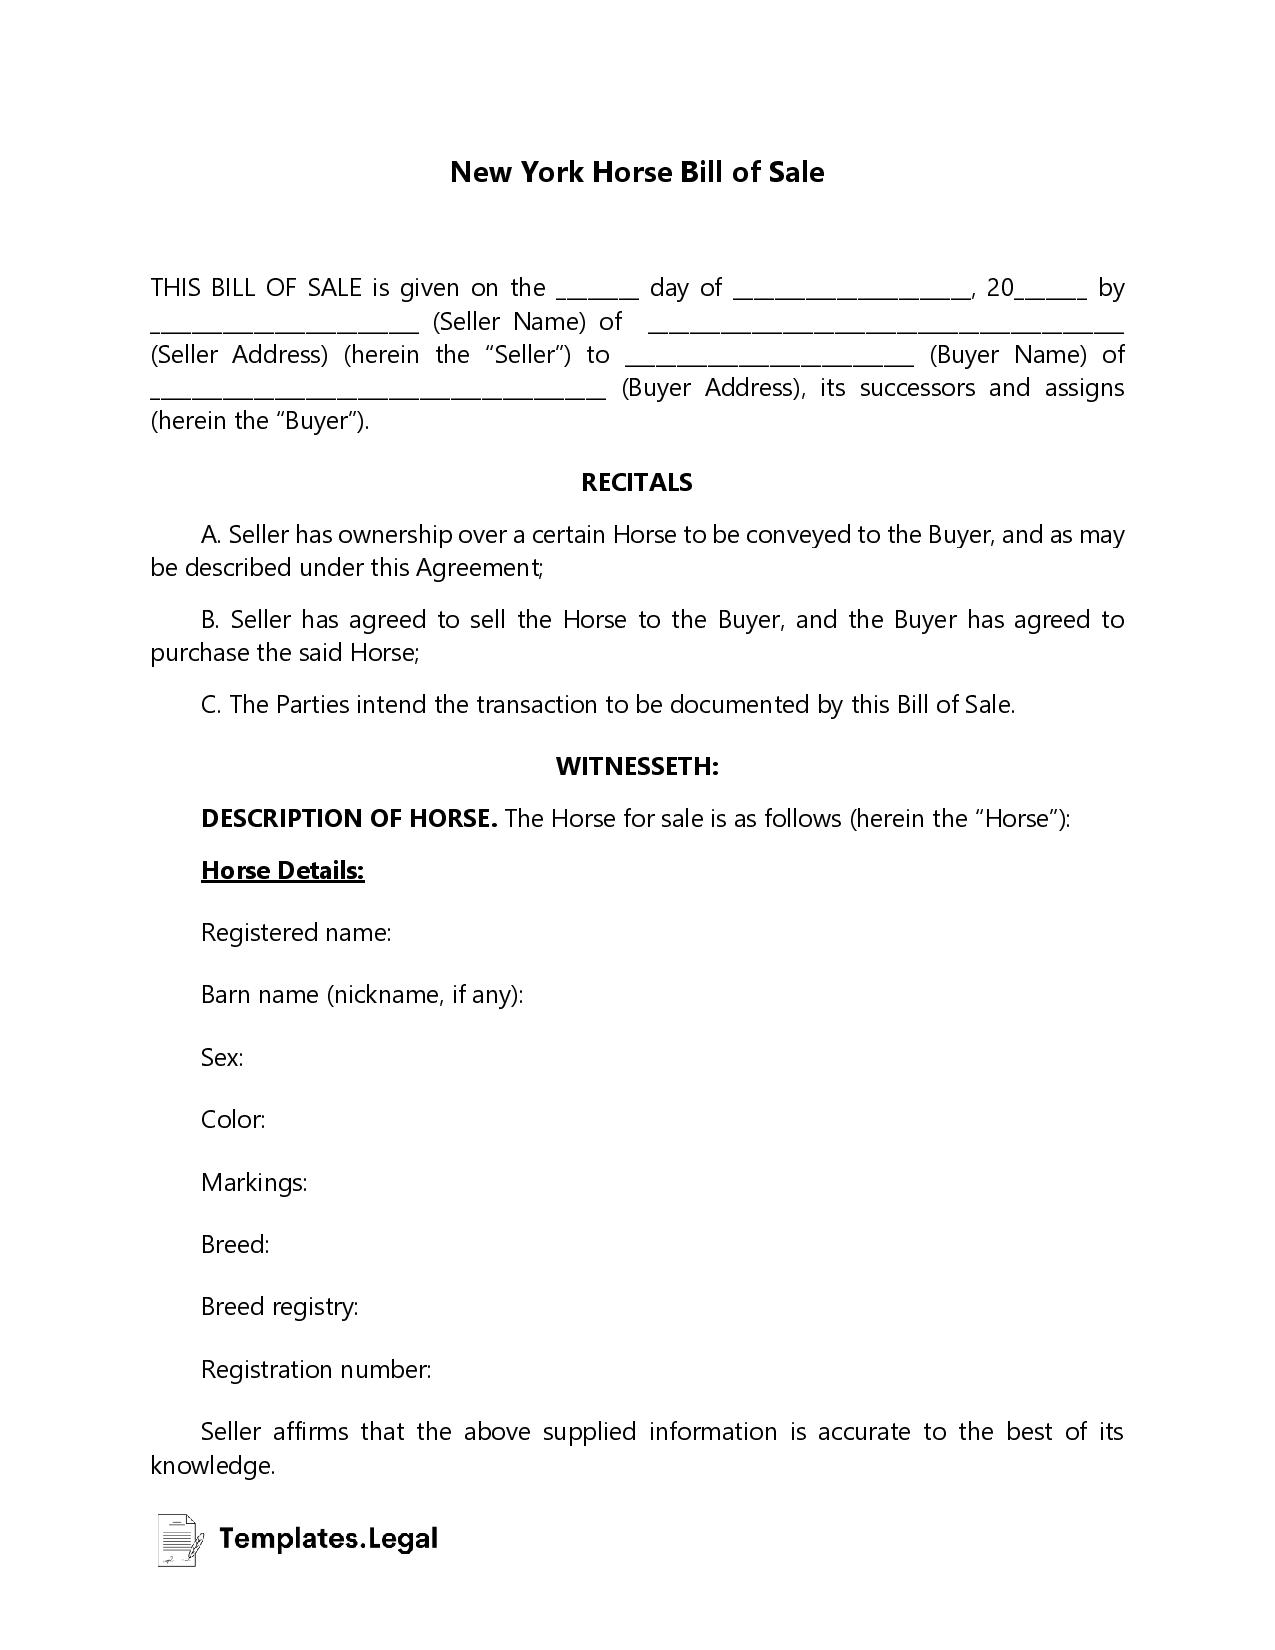 New York Horse Bill of Sale - Templates.Legal